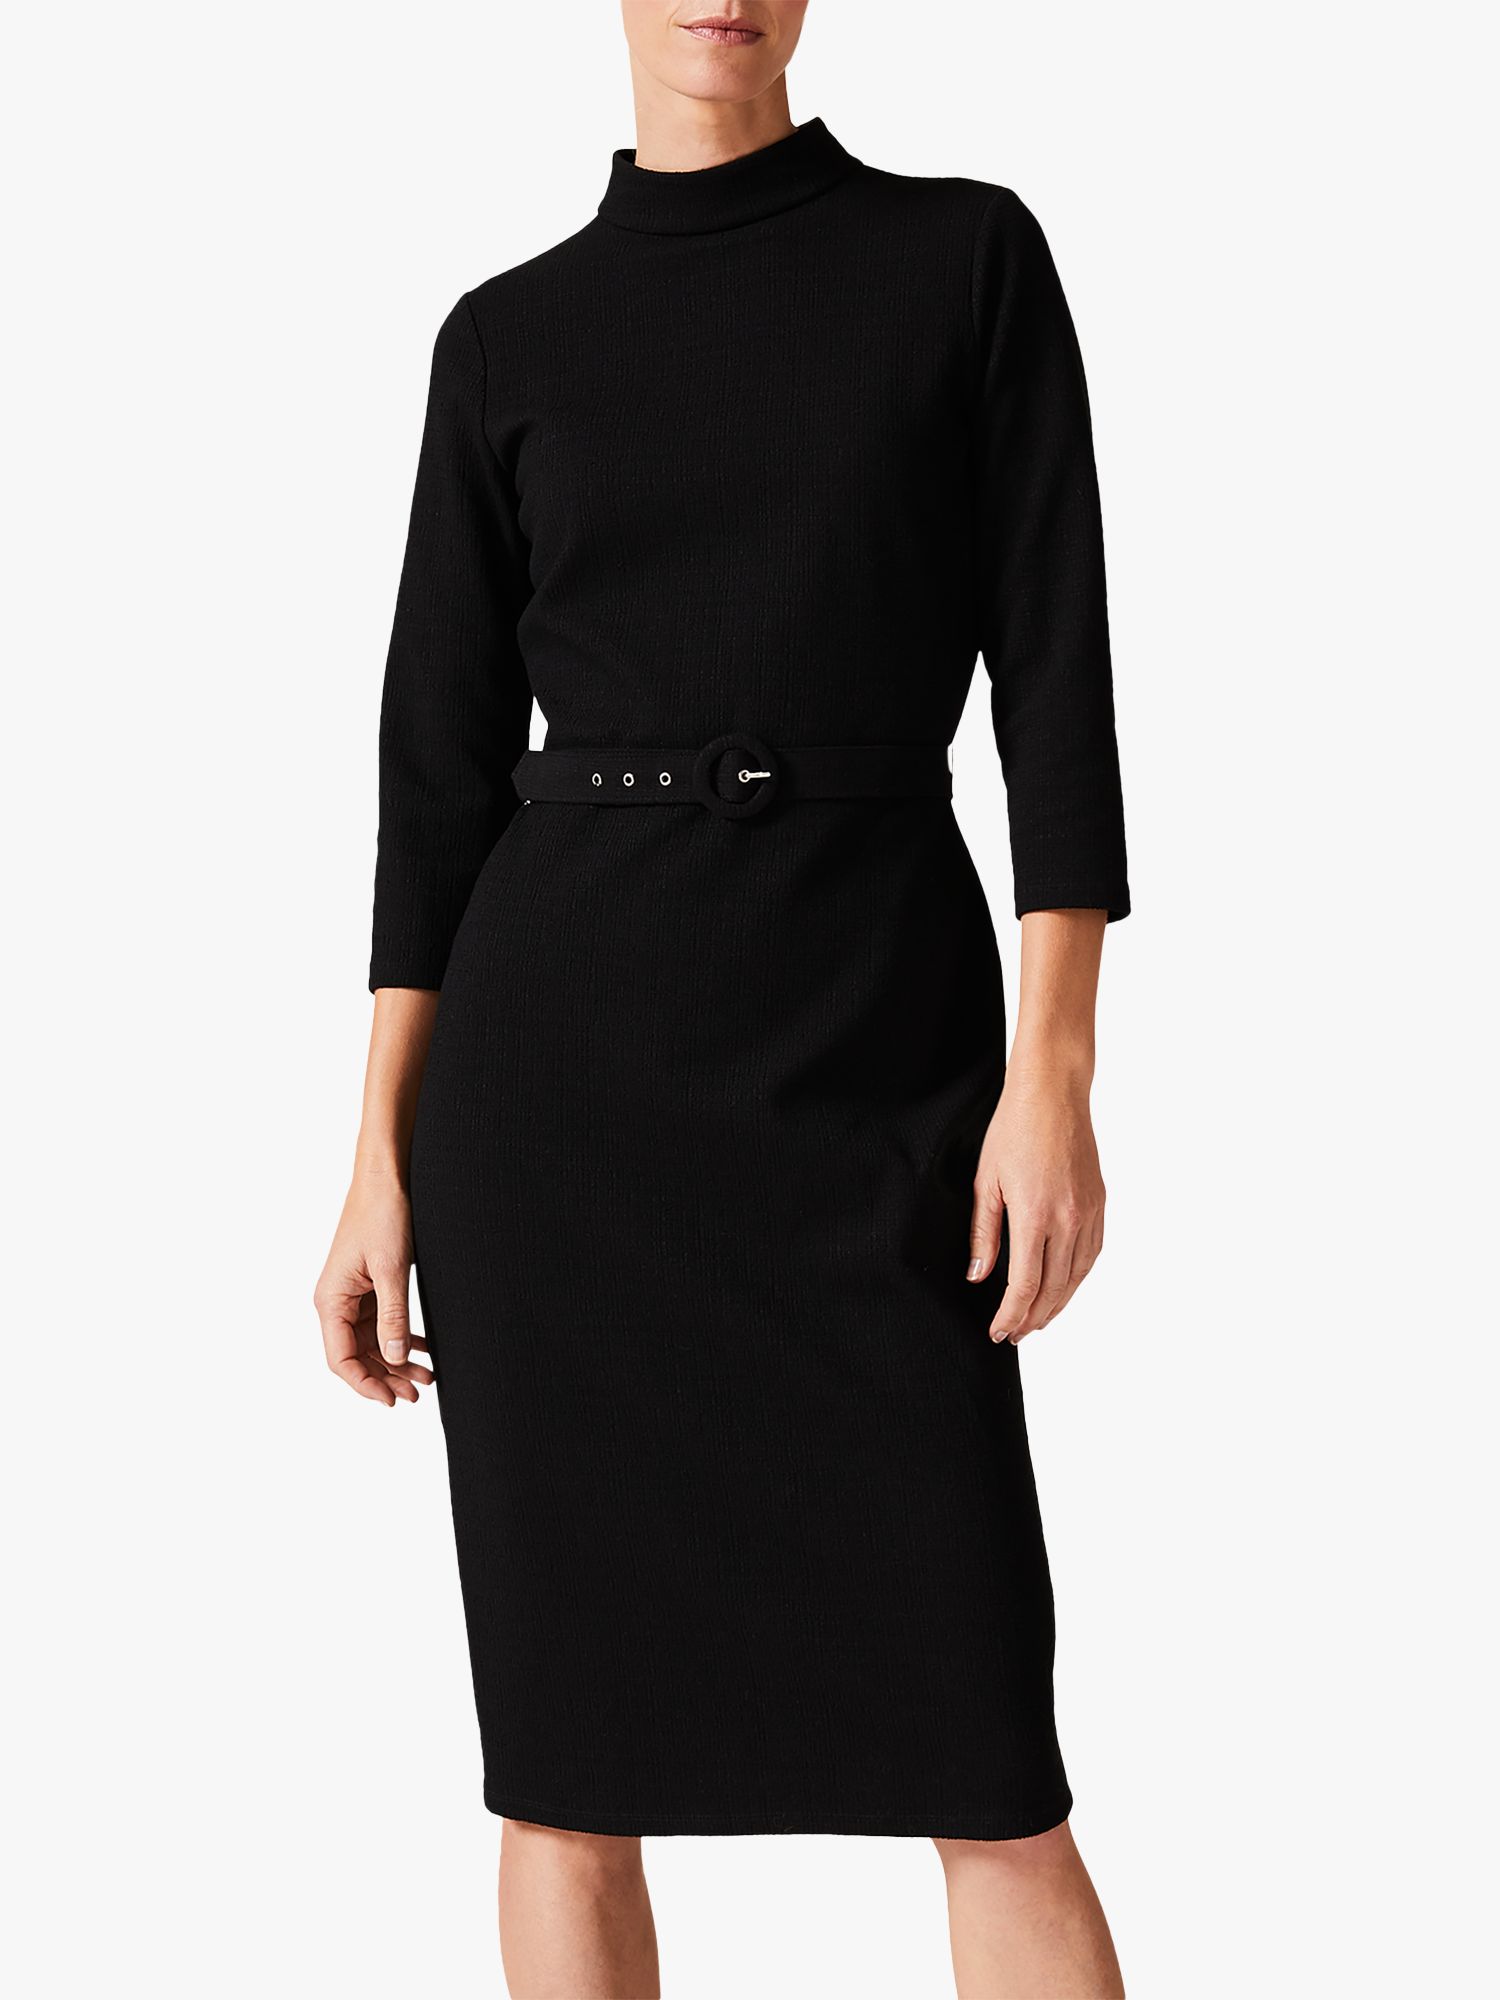 Phase Eight Sheree High Neck Fitted Dress, Black at John Lewis & Partners